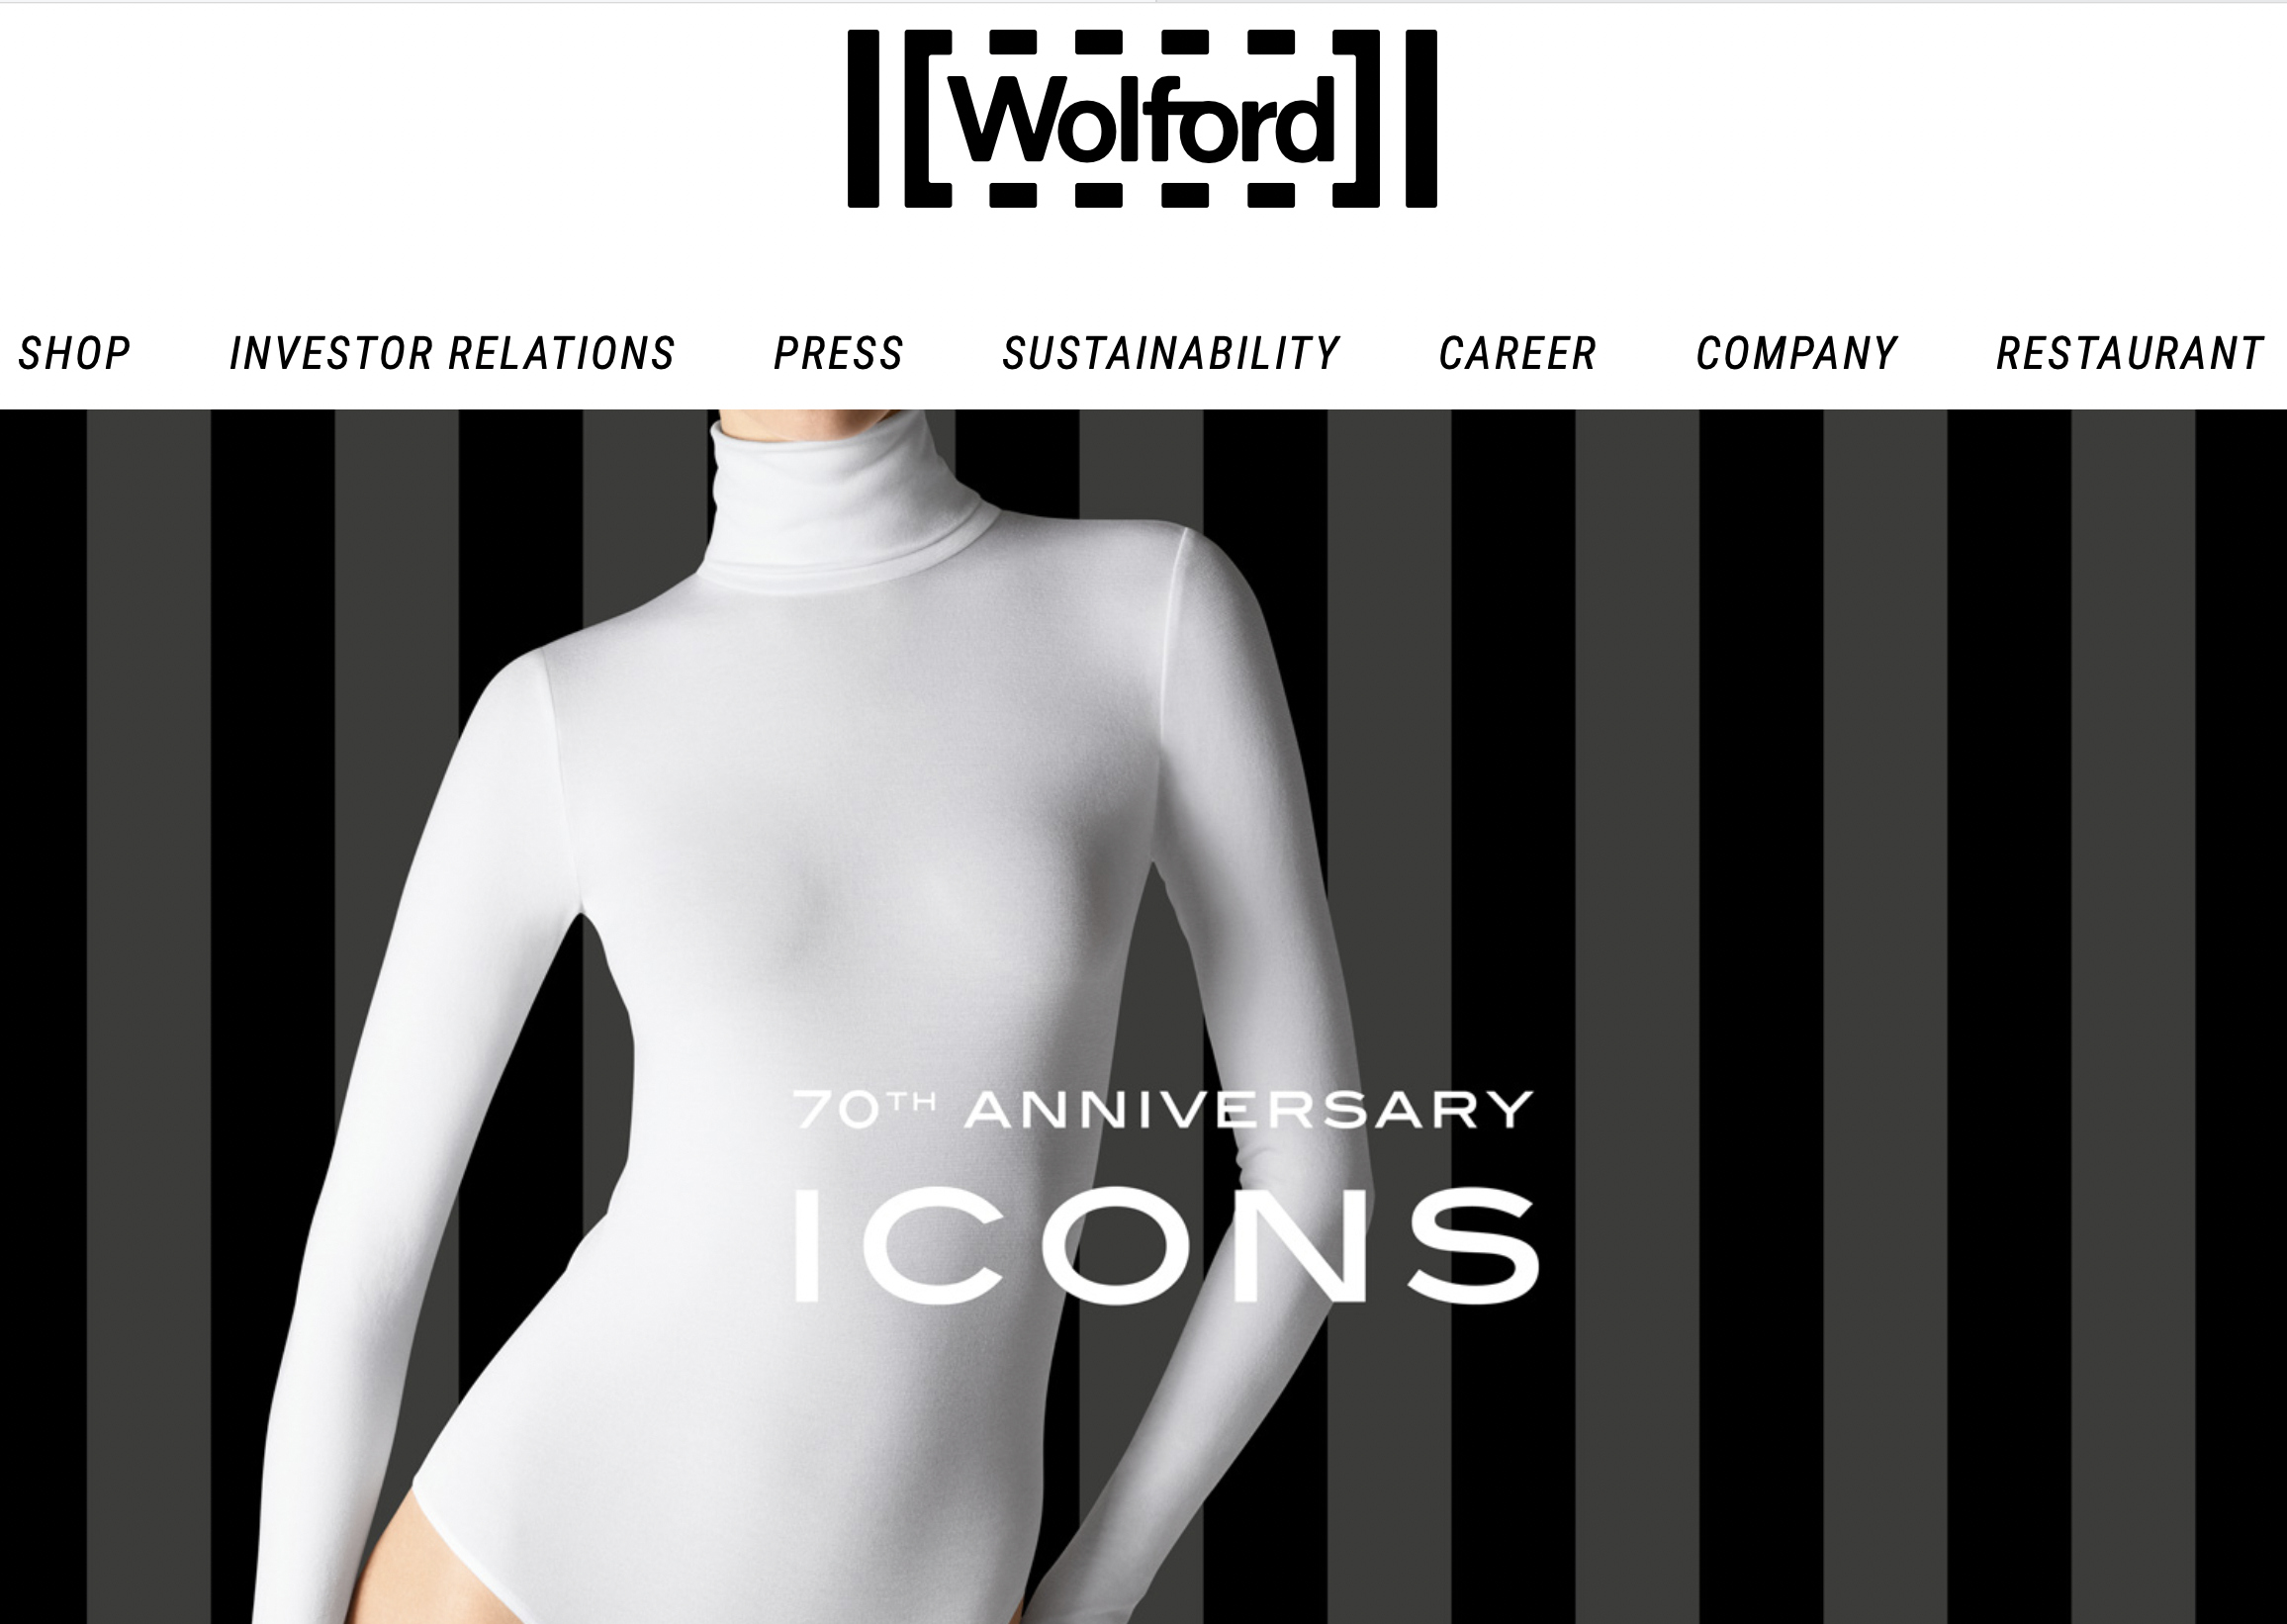 Wolford Has Released Preliminary Annual Data Showing Sales Growth but Continued Losses